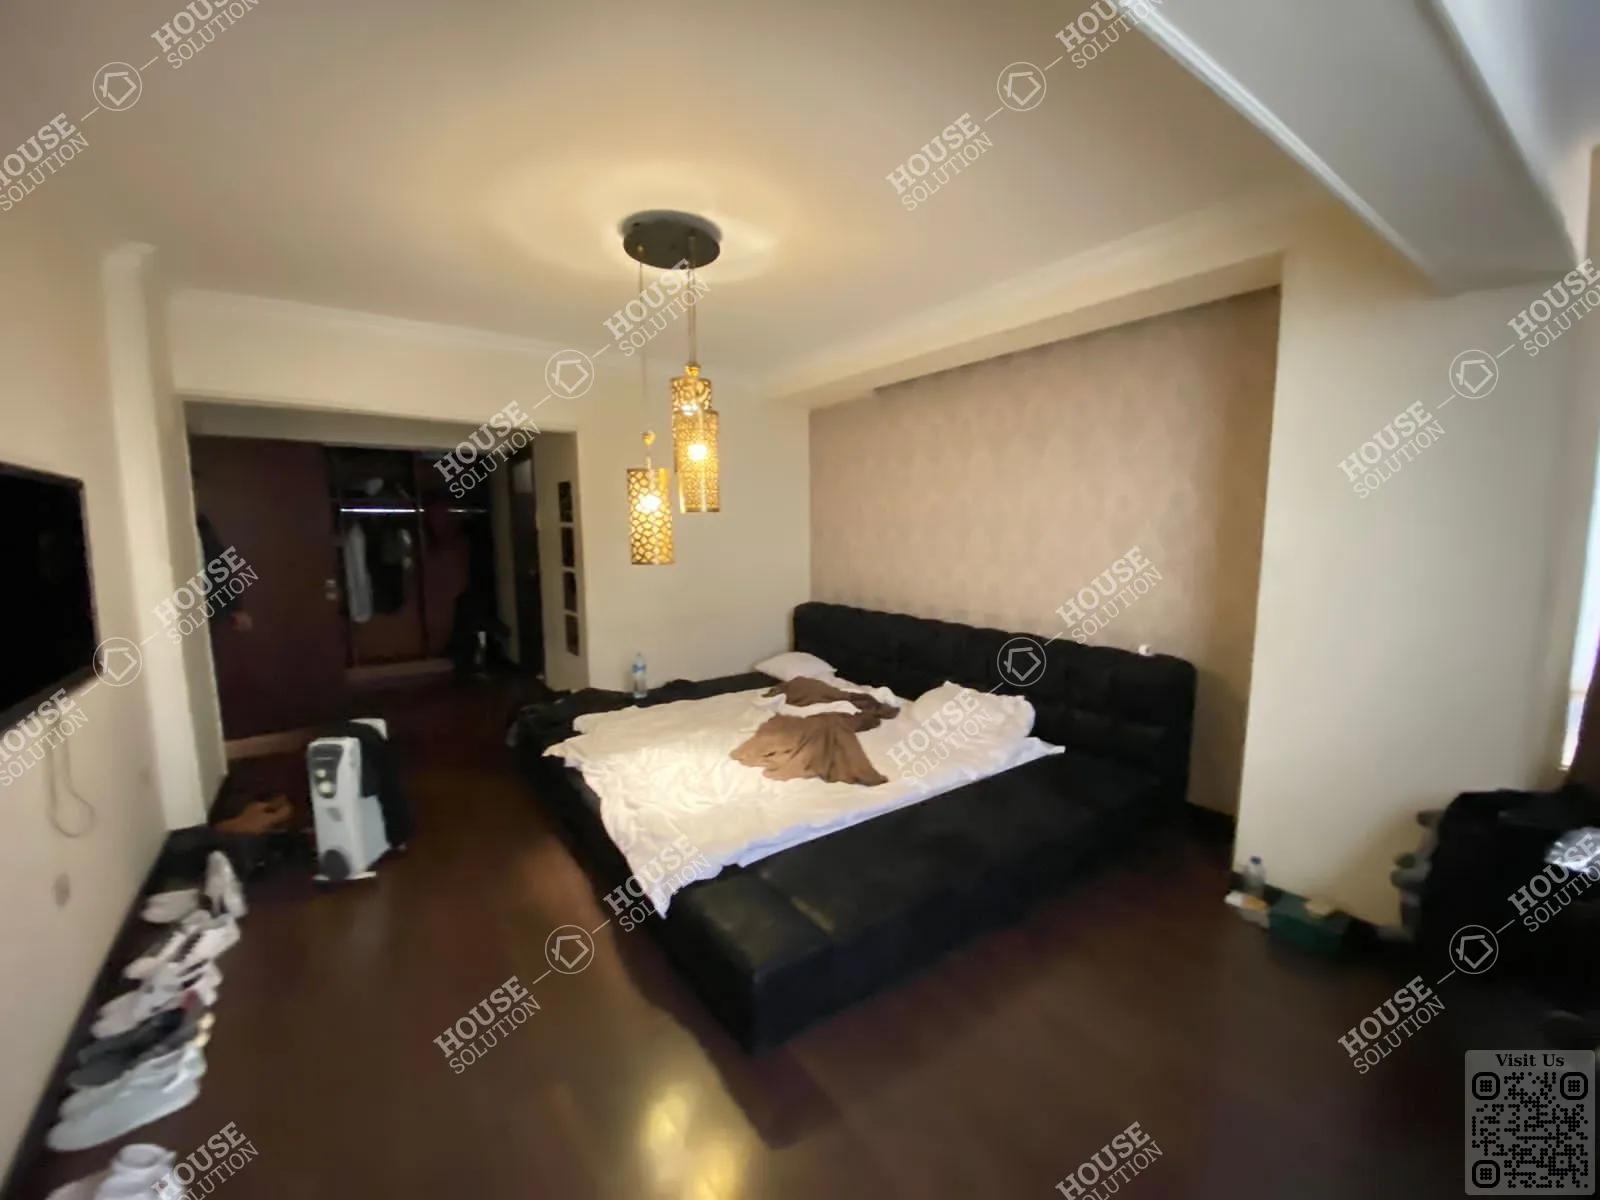 FIRST BEDROOM  @ Apartments For Sale In Maadi Maadi Degla Area: 190 m² consists of 2 Bedrooms 2 Bathrooms Modern furnished 5 stars #5583-1